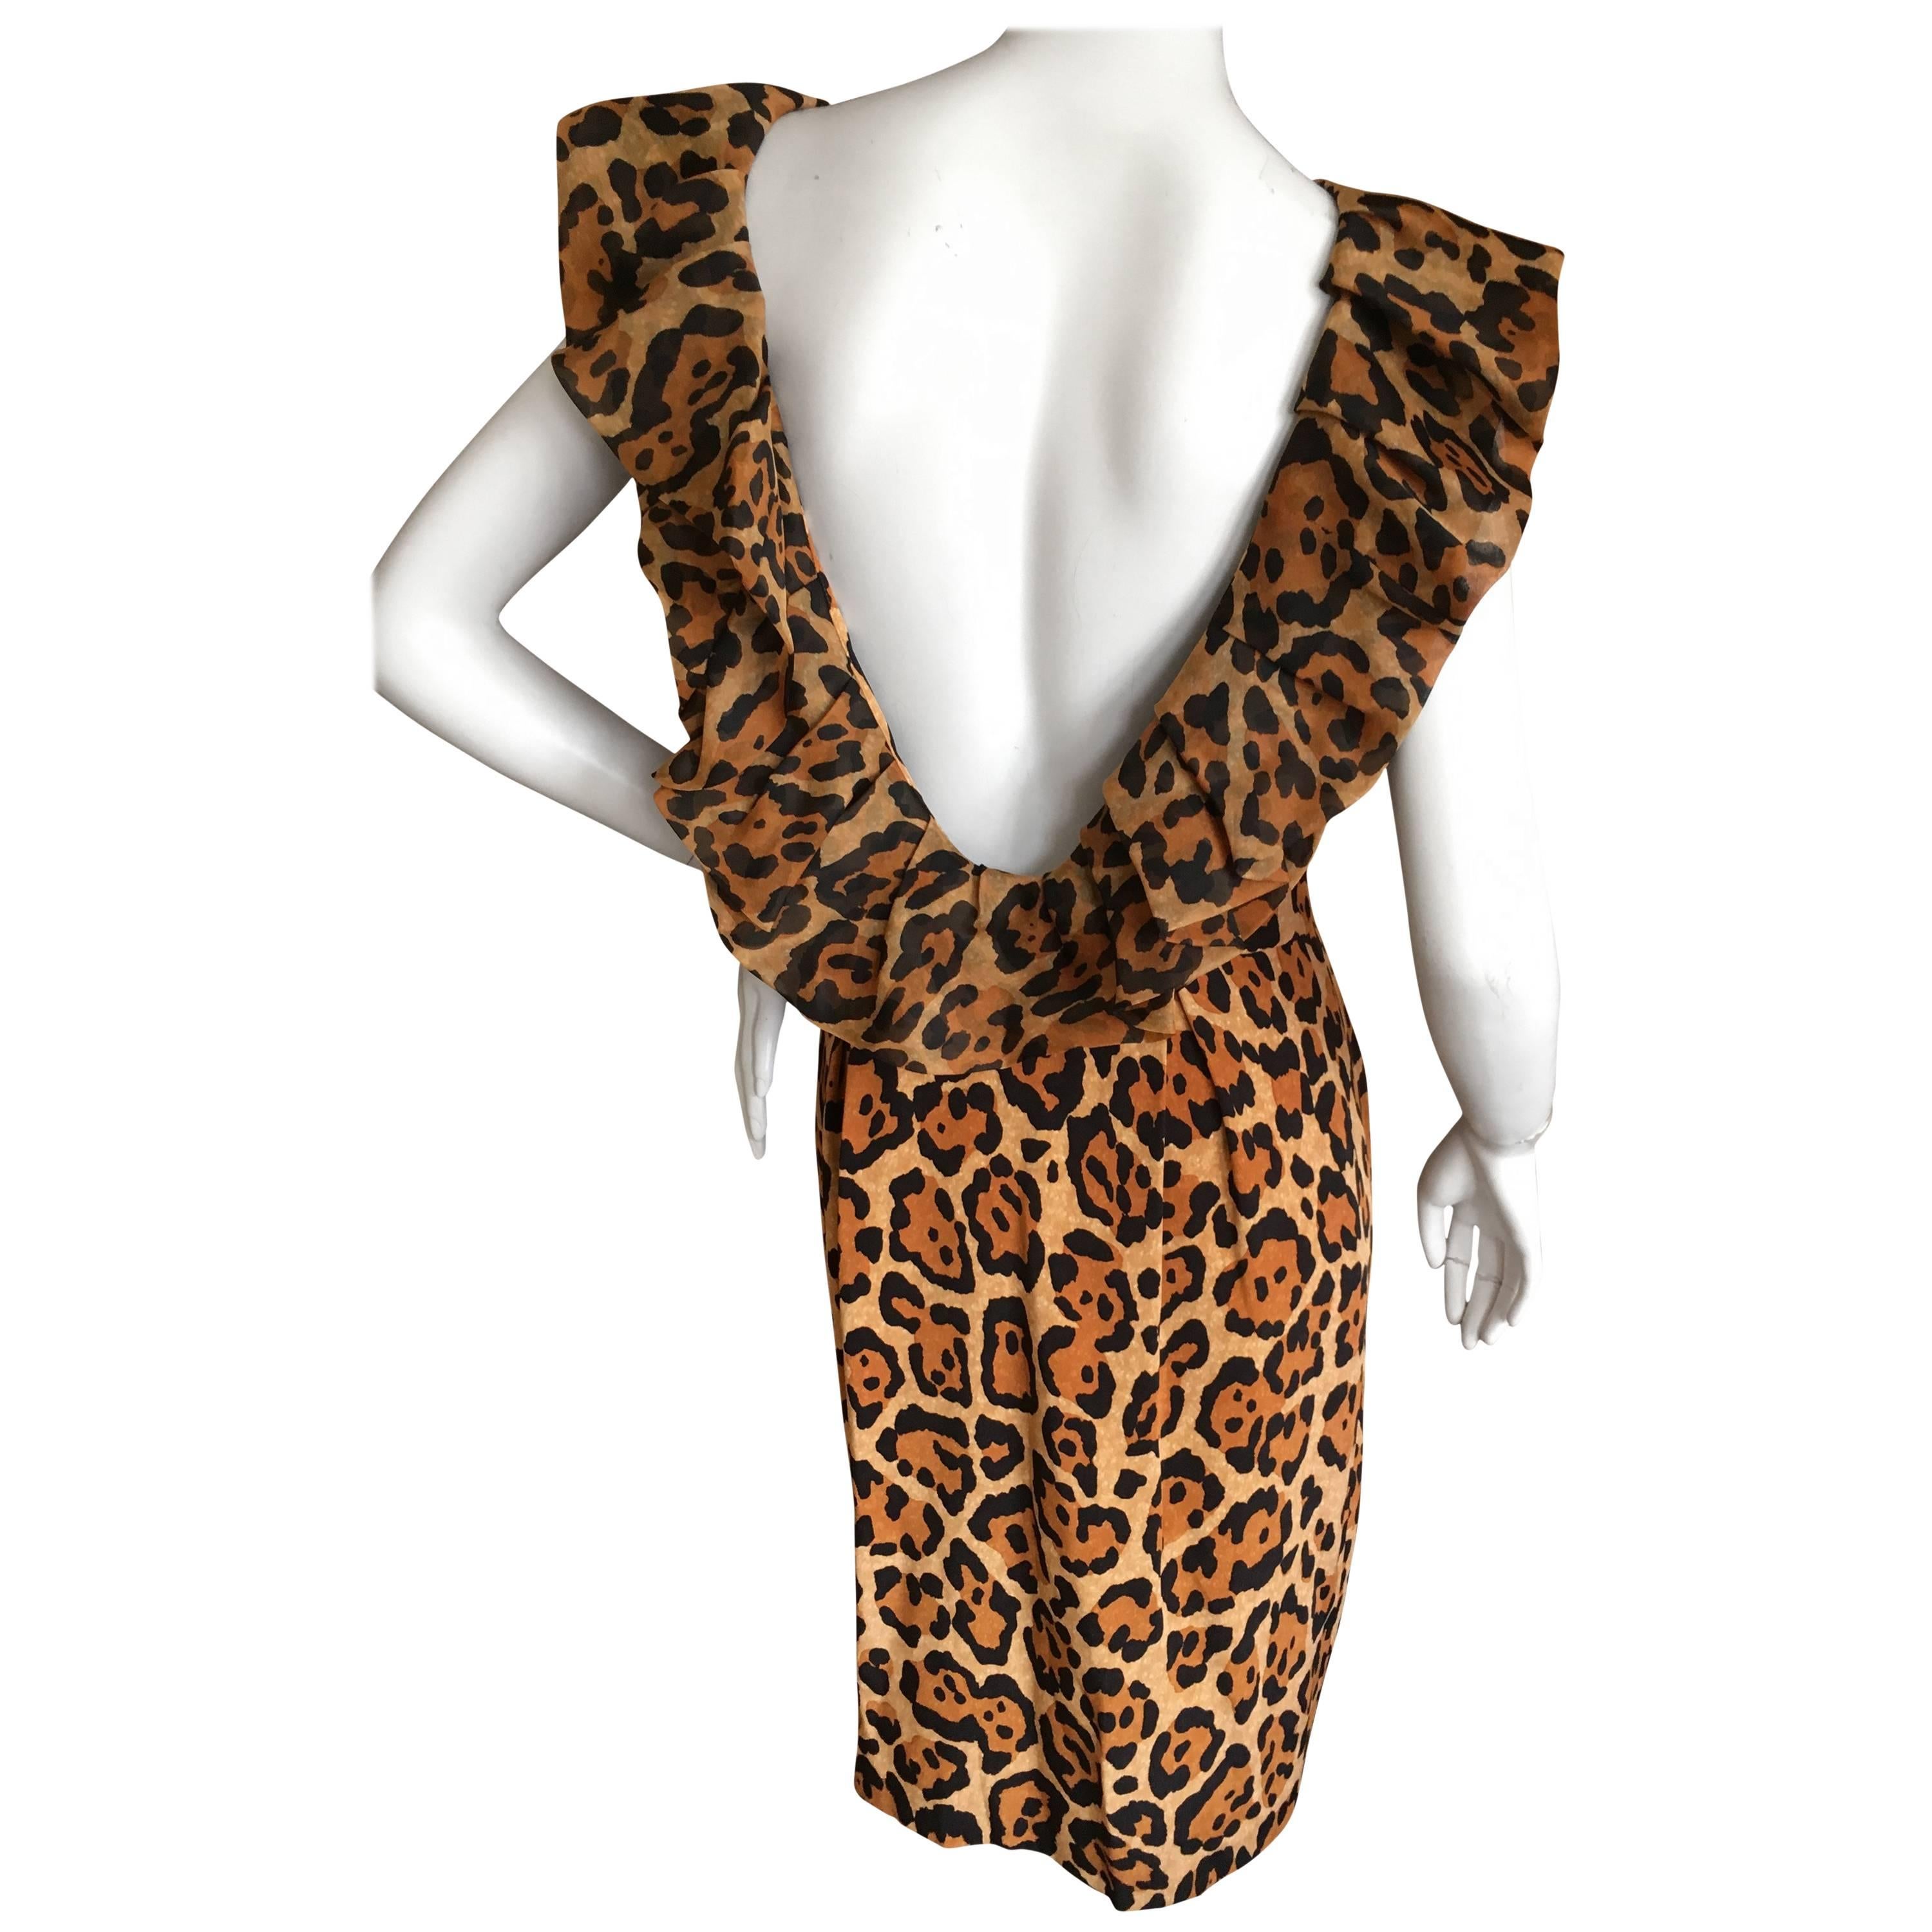 Christian Dior Backless Ruffled Leopard Print Cocktail Dress by John Galliano For Sale